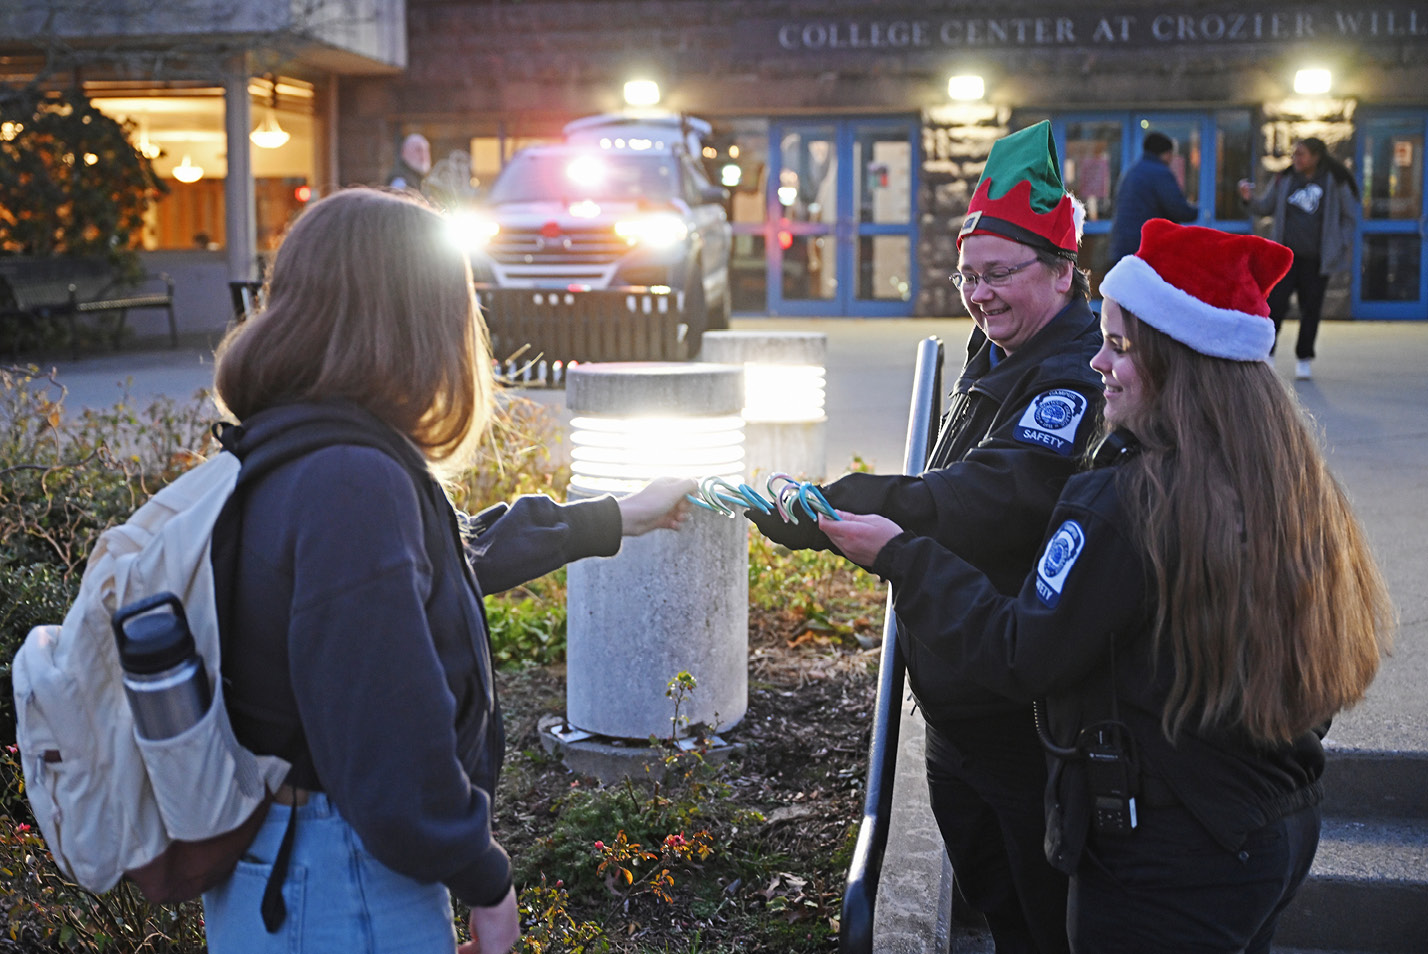 Campus safety workers handout candy canes in front of Cro.